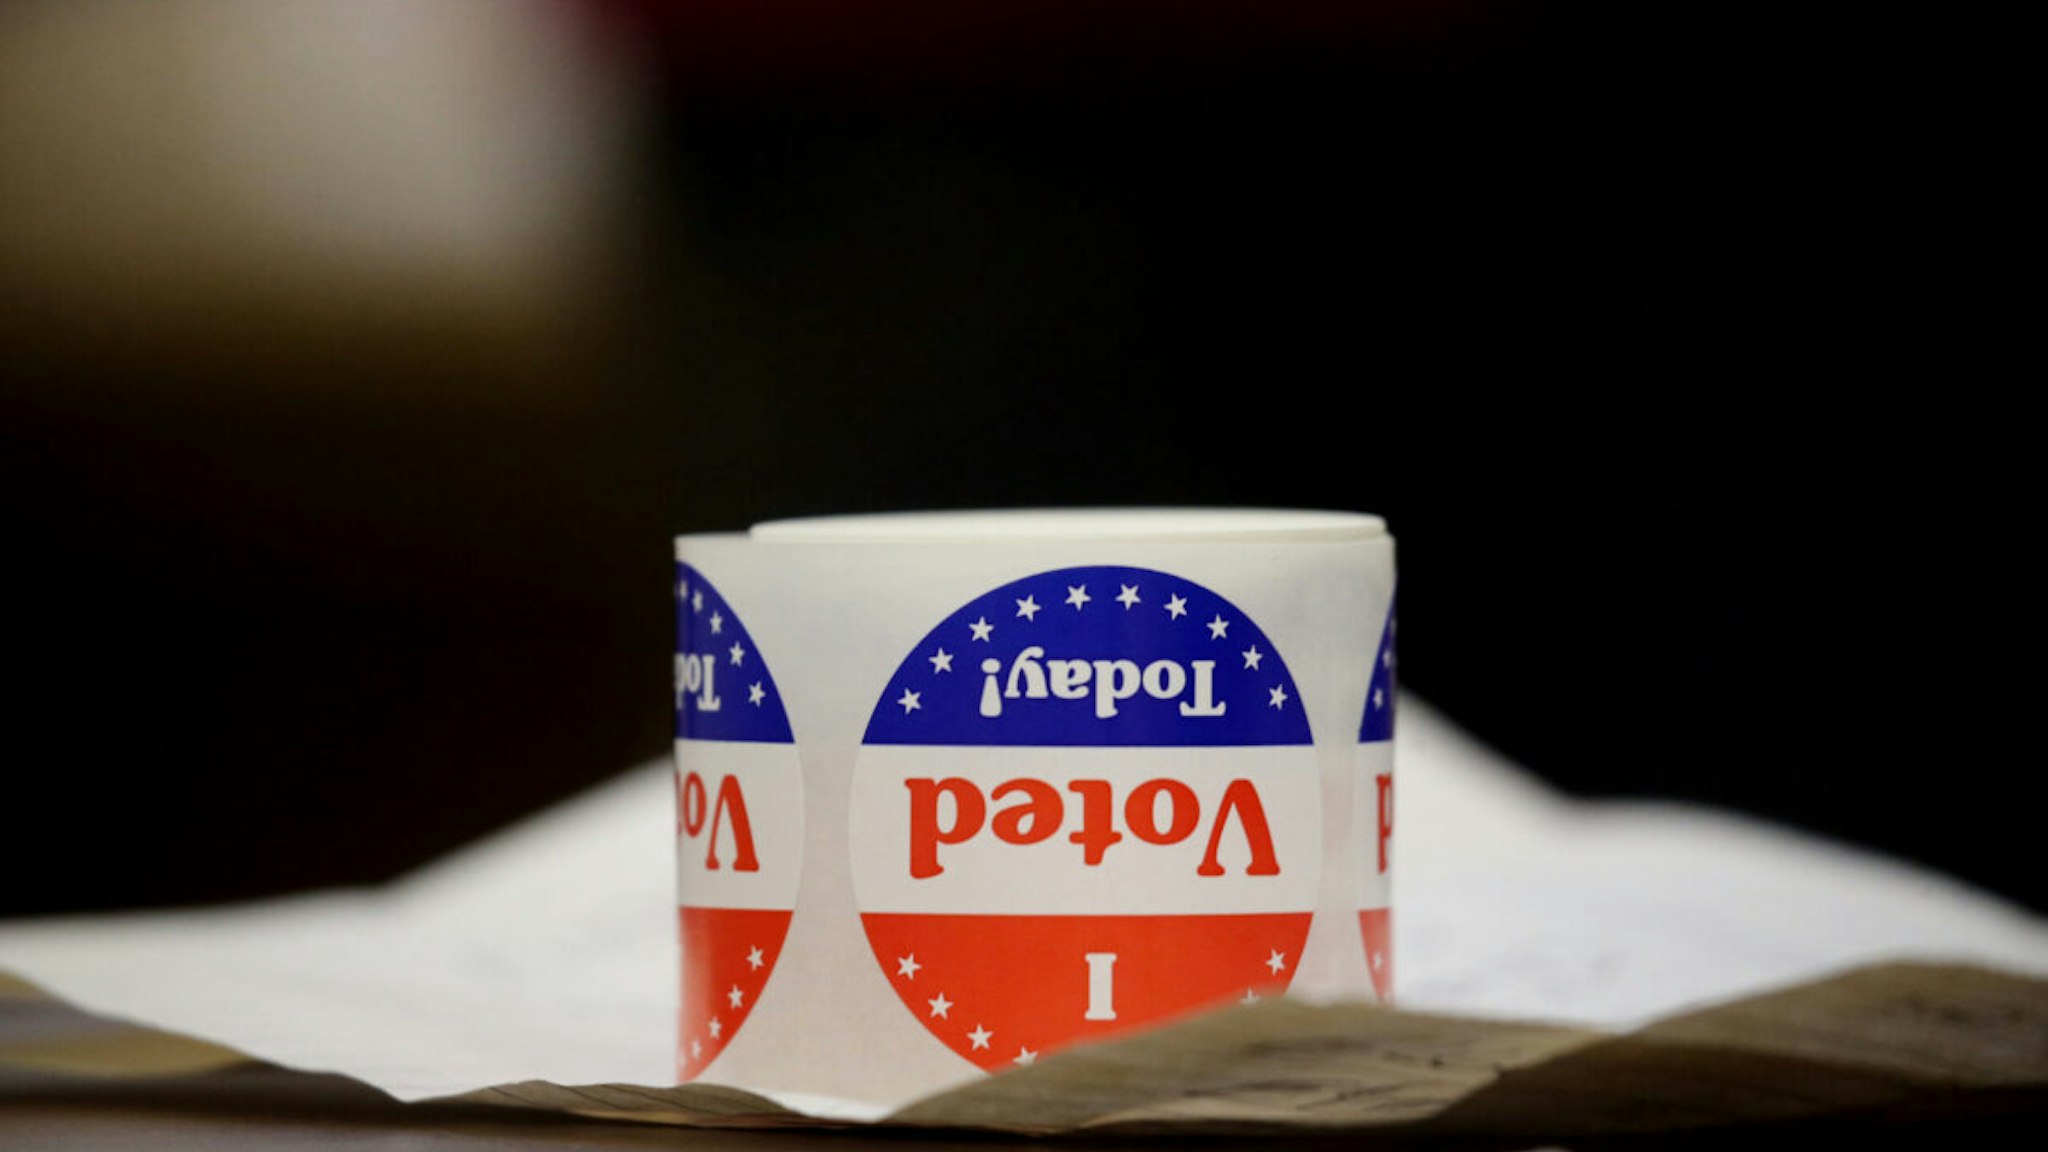 Stickers sit on a table at Saint John the Baptist Parish in Quincy, MA on election day, November 03, 2020.